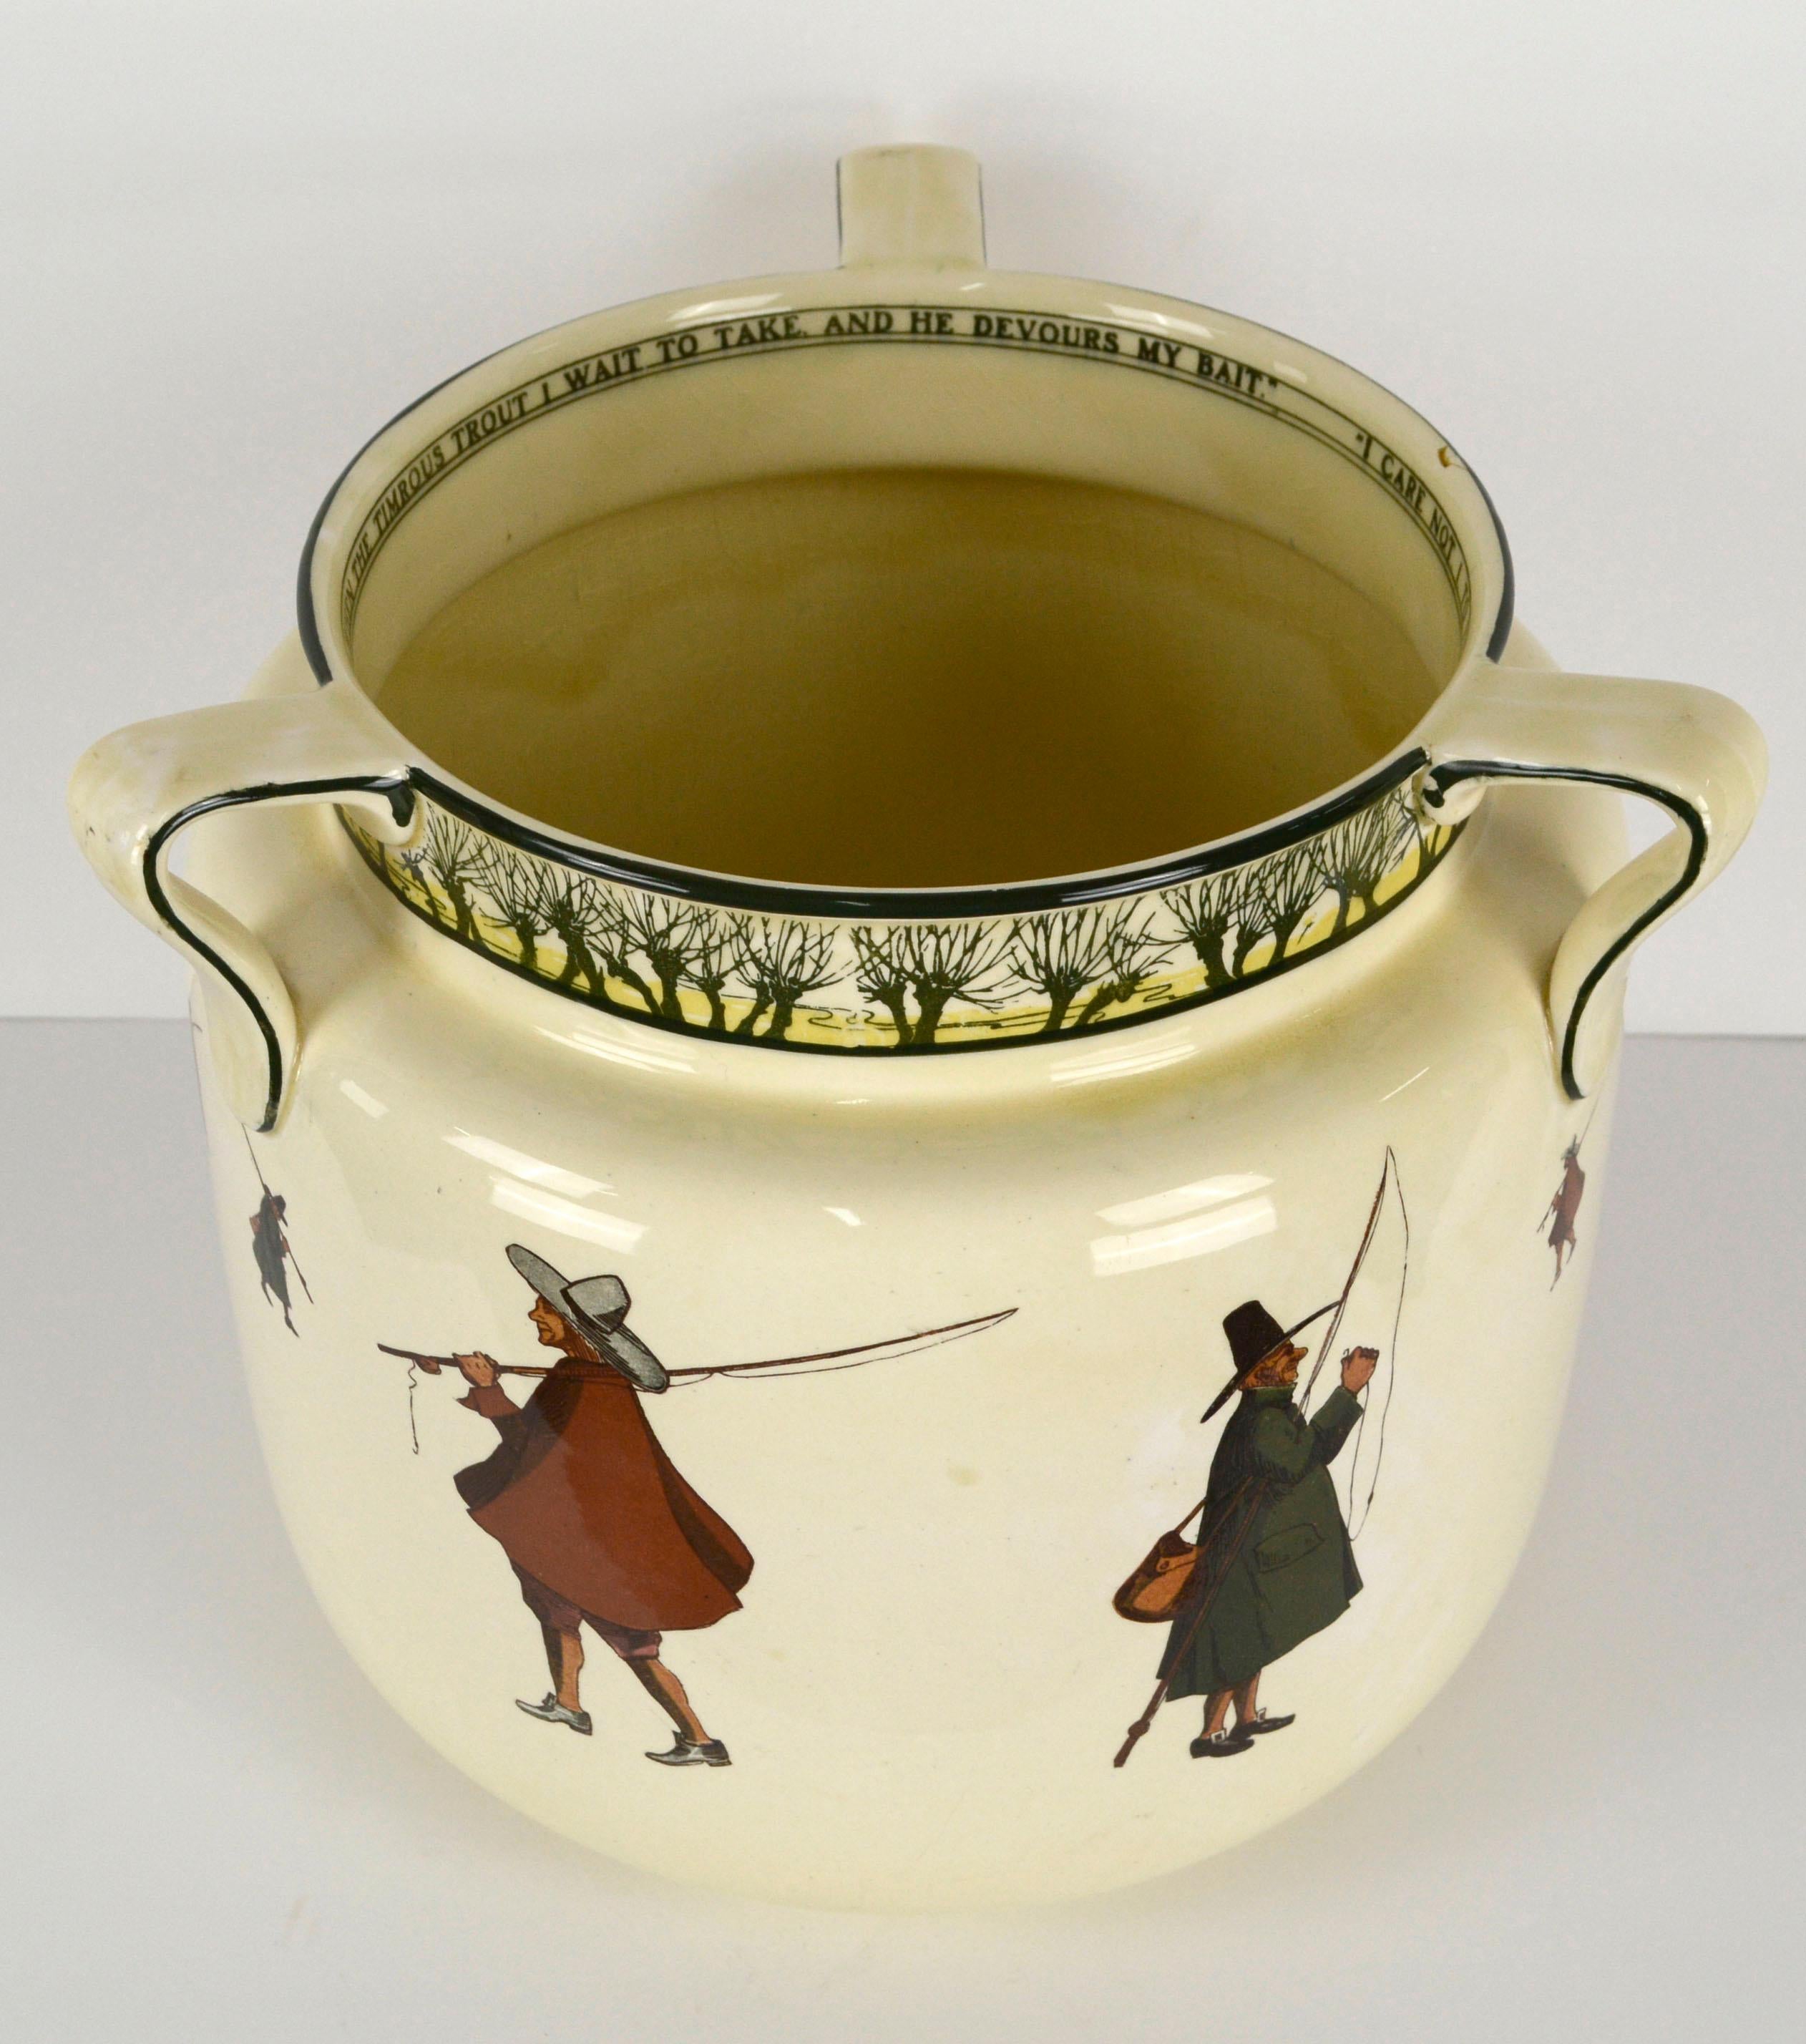 Large late 19th century stoneware jardiniere, a Royal Doulton Isaac Walton Series Ware piece by Charles Noke (English, 1858-1683). This large jardiniere has three handles and is decorated with several detailed figures; characters based on the 17th